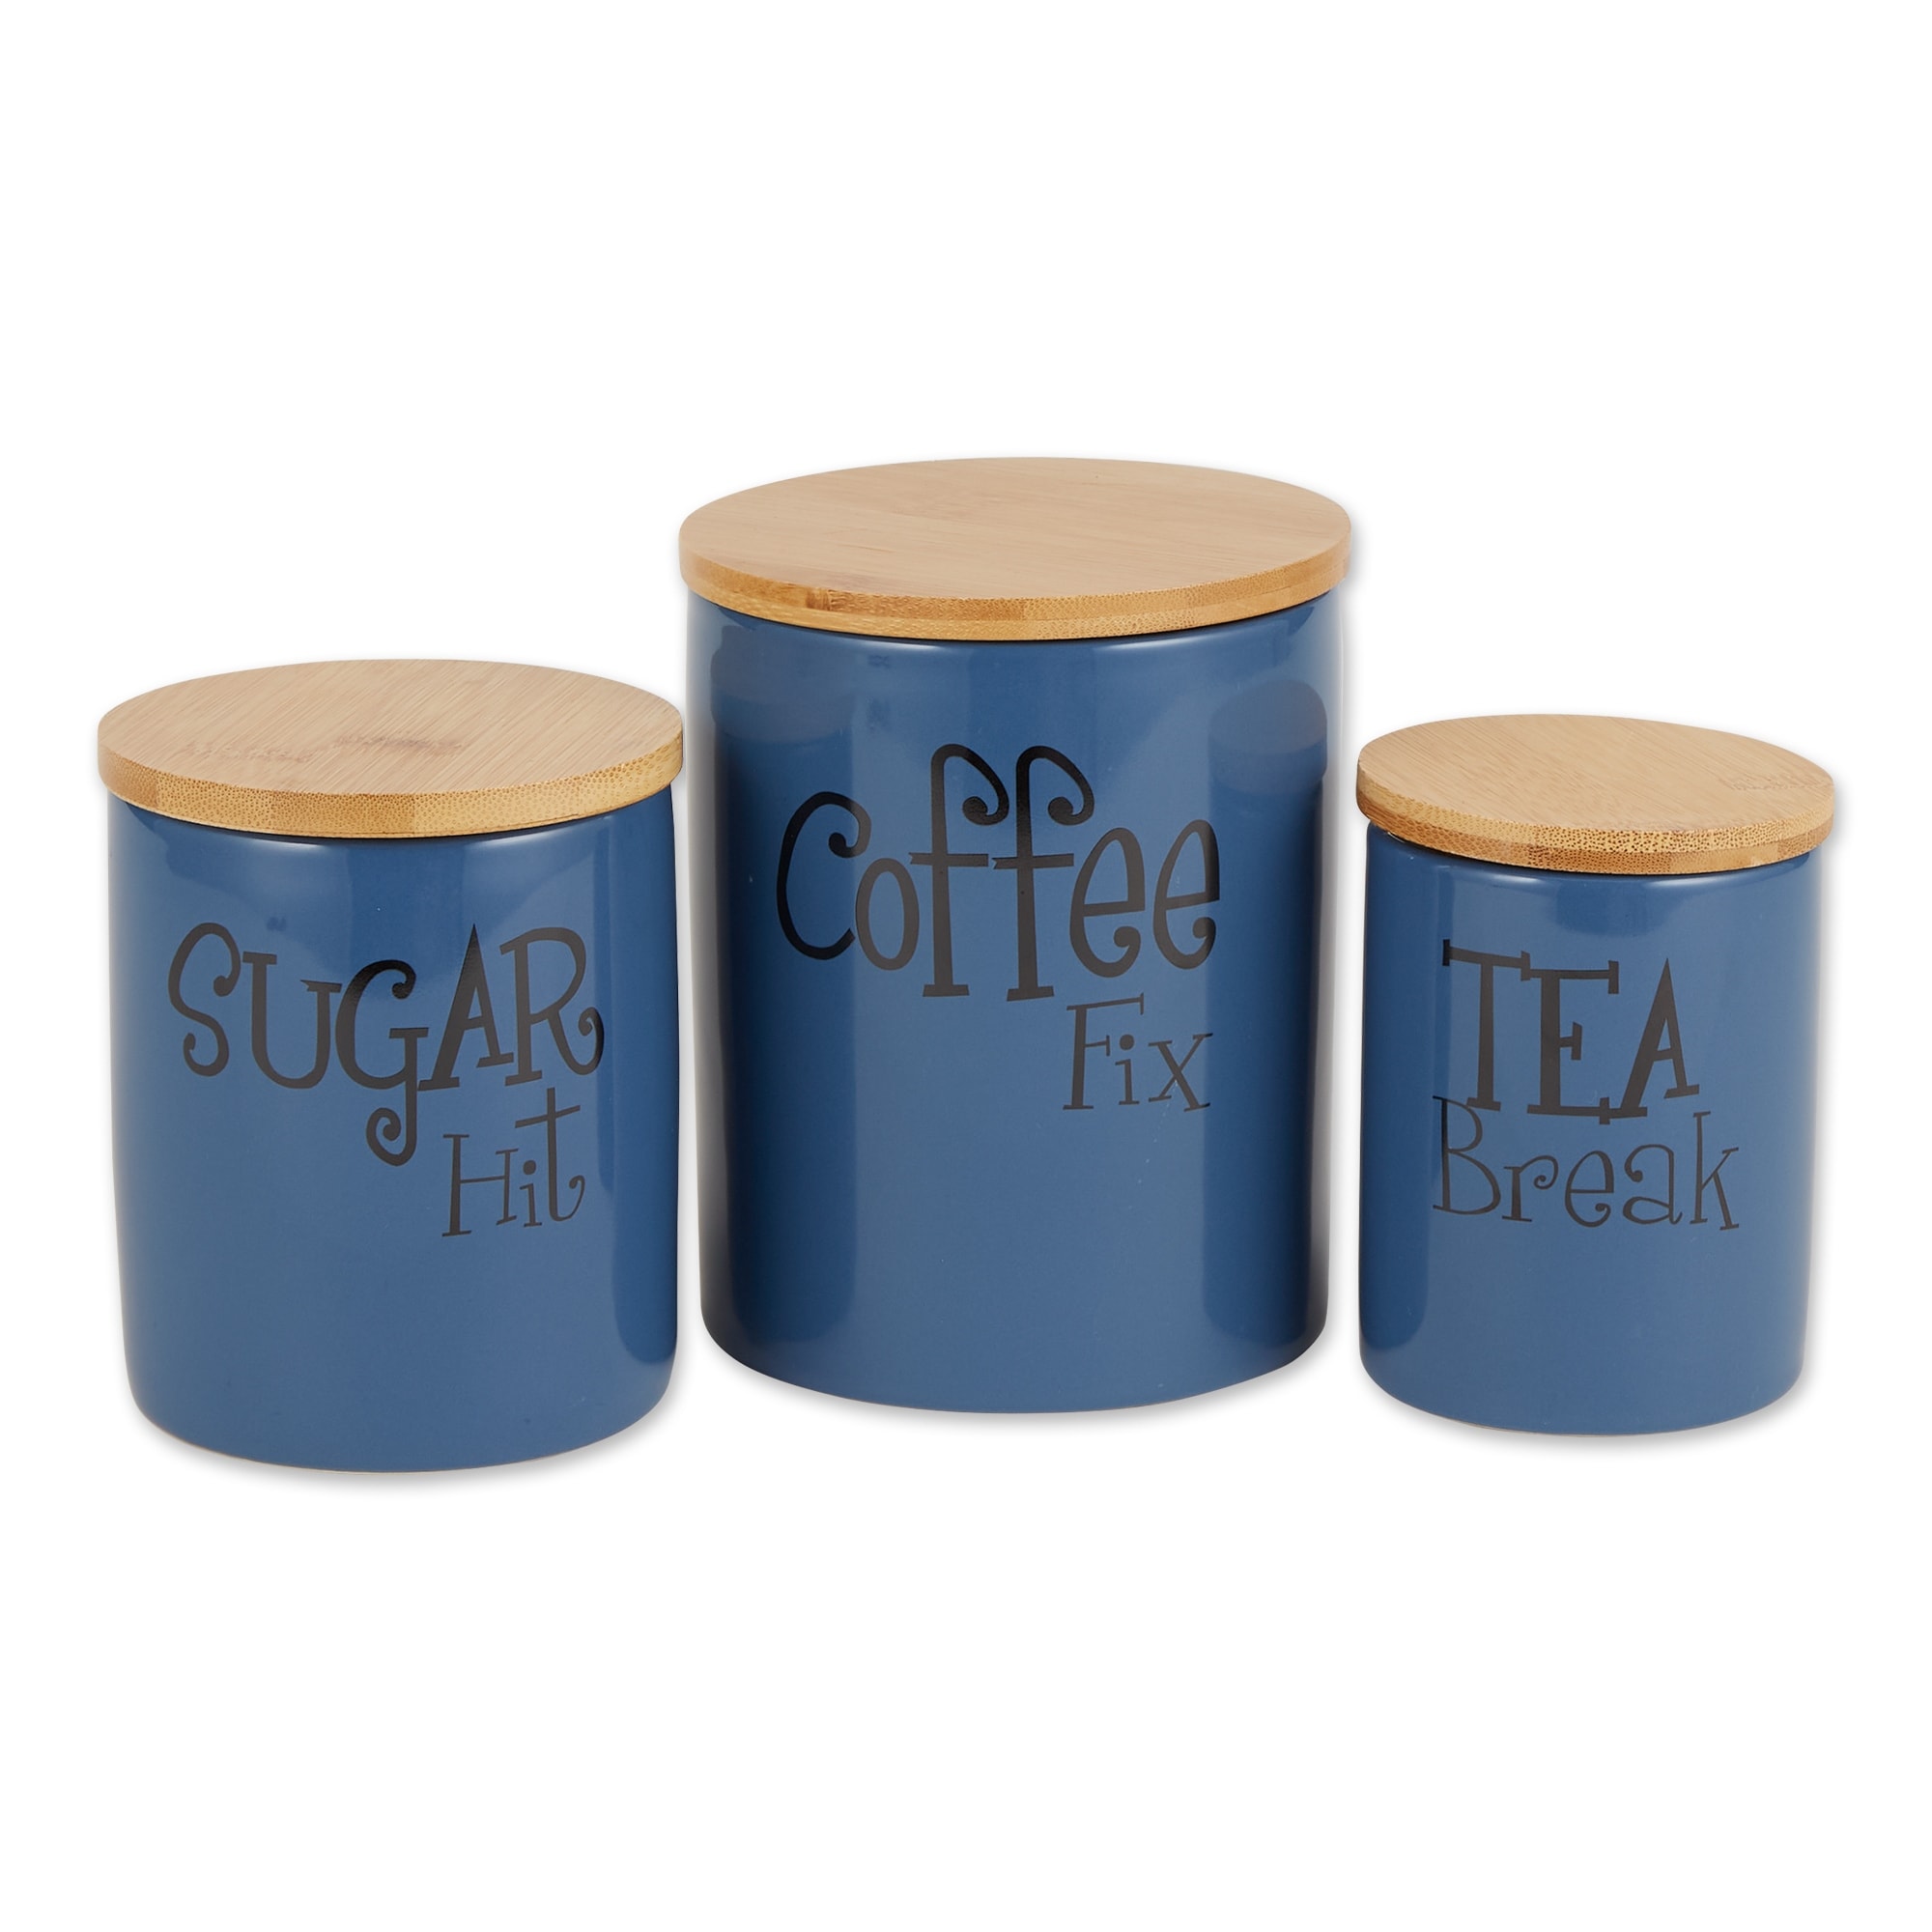 https://ak1.ostkcdn.com/images/products/is/images/direct/6bf2fb9b25443e39ef3c836e8ddd3c9f86081523/DII-Coffee-Sugar-Tea-Ceramic-Canister-%28Set-of-3%29.jpg